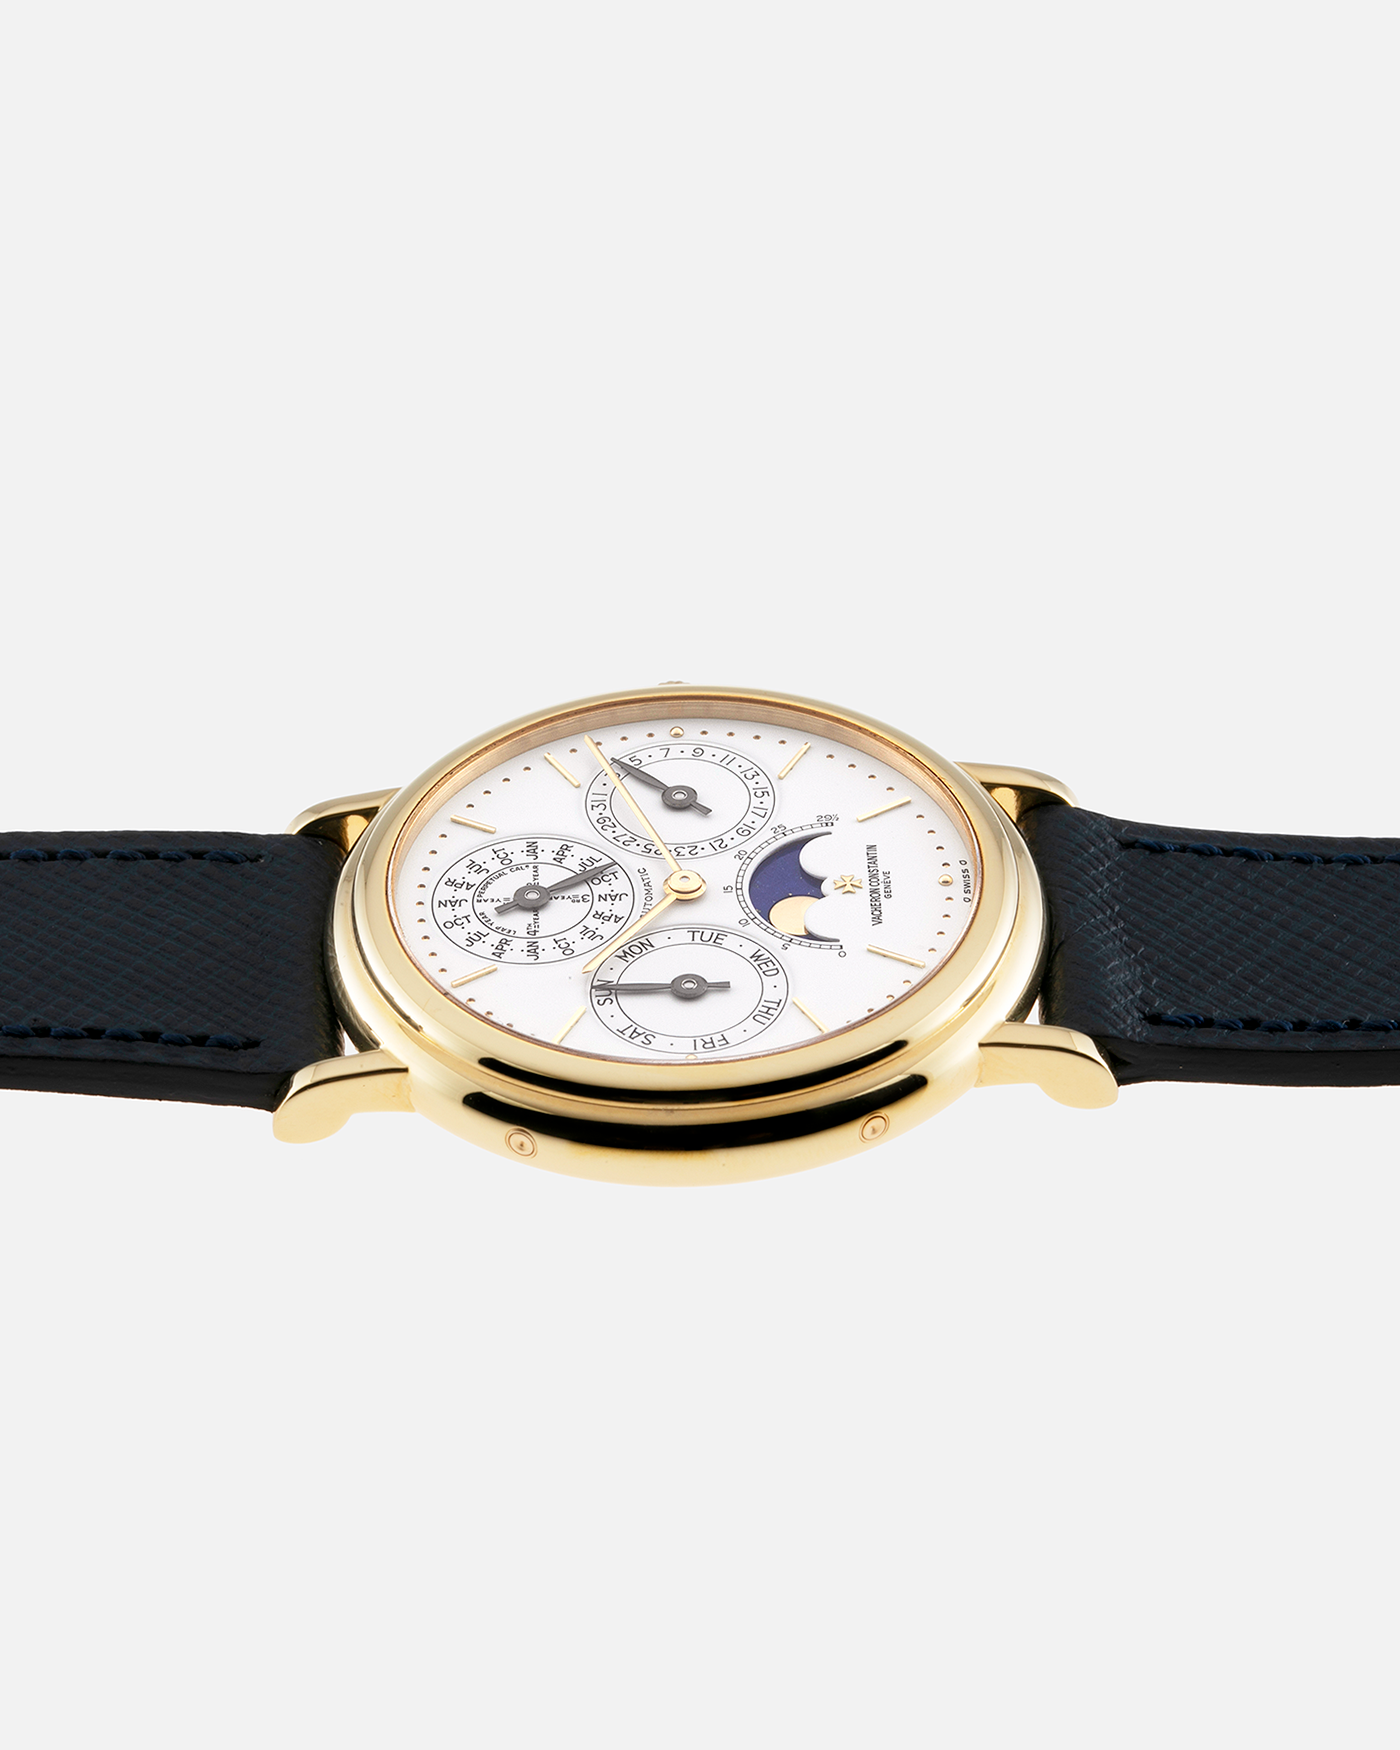 Brand: Vacheron Constantin Year: 1990’s Model: Perpetual Calendar Reference Number: 43031 Material: 18k Yellow Gold Movement: Vacheron Constantin Cal. 1120/2 Case Diameter: 36mm Bracelet: Molequin Navy Blue Texture Calf and Vacheron Constantin Black Alligator with 18k Yellow Gold Tang Buckle